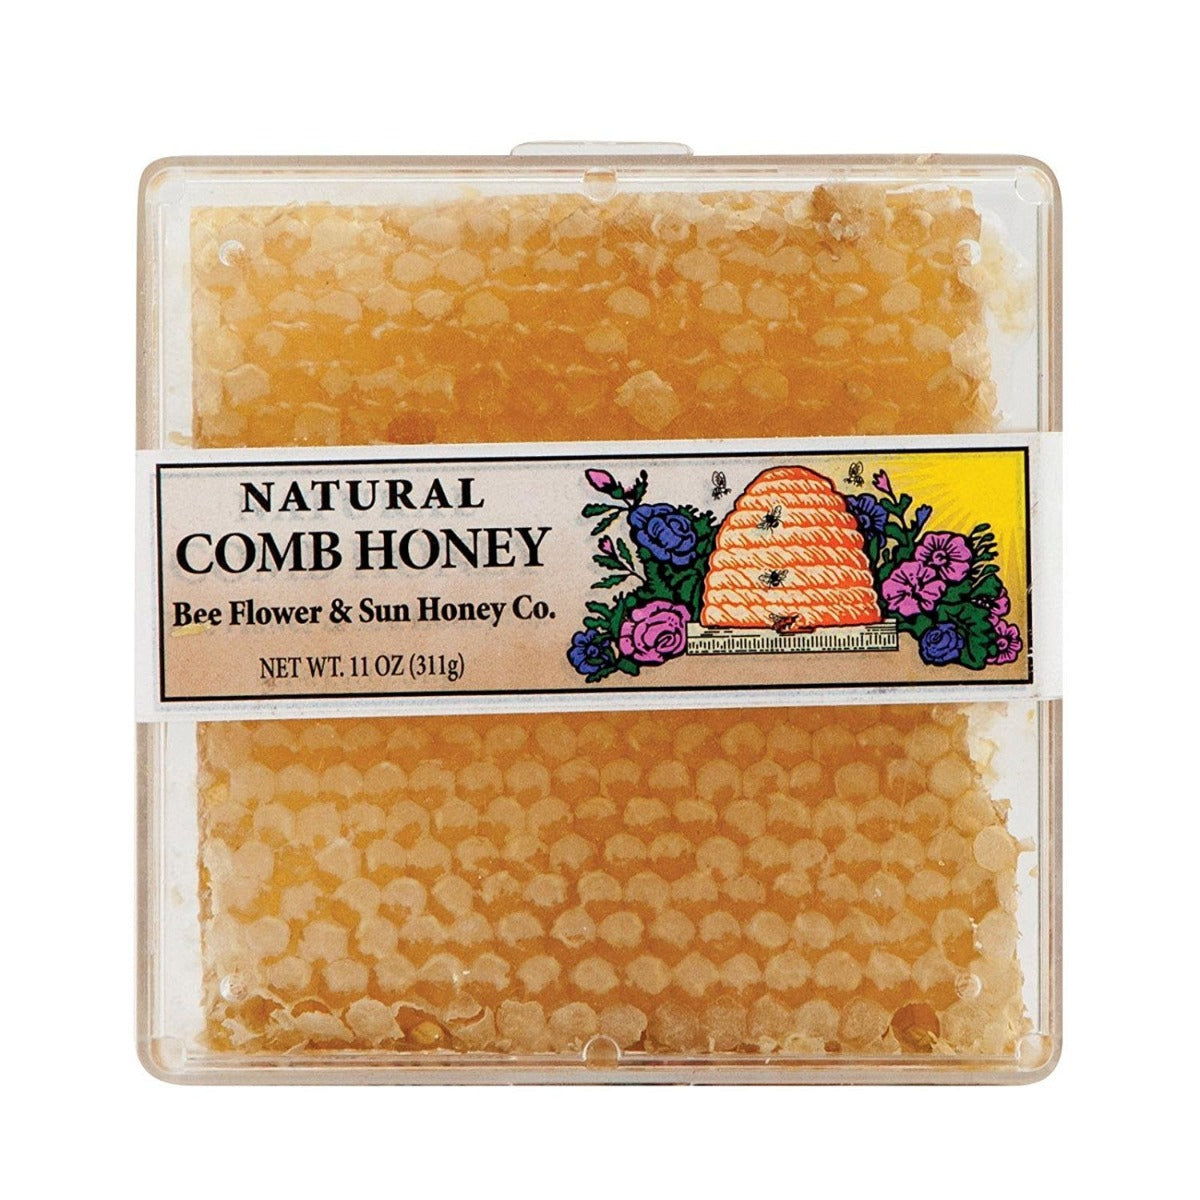 BEE FLOWER AND SUN HONEY: Natural Comb Honey, 11 oz - Vending Business Solutions